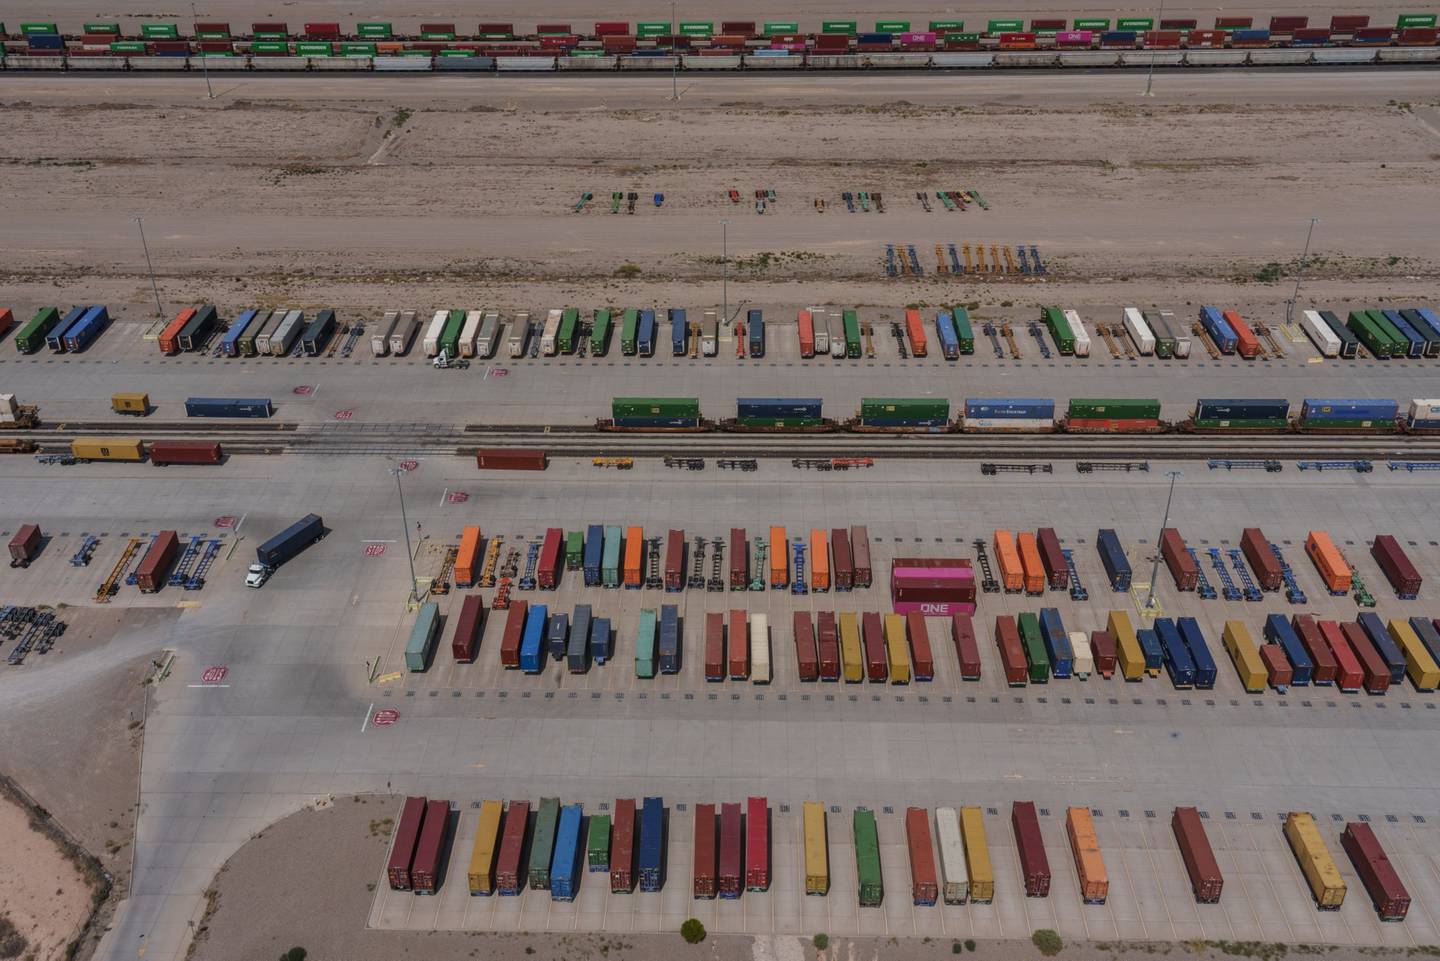 An aerial view of the Union Pacific intermodal Terminal in Santa Teresa, New Mexico on Tuesday, August 9, 2022.